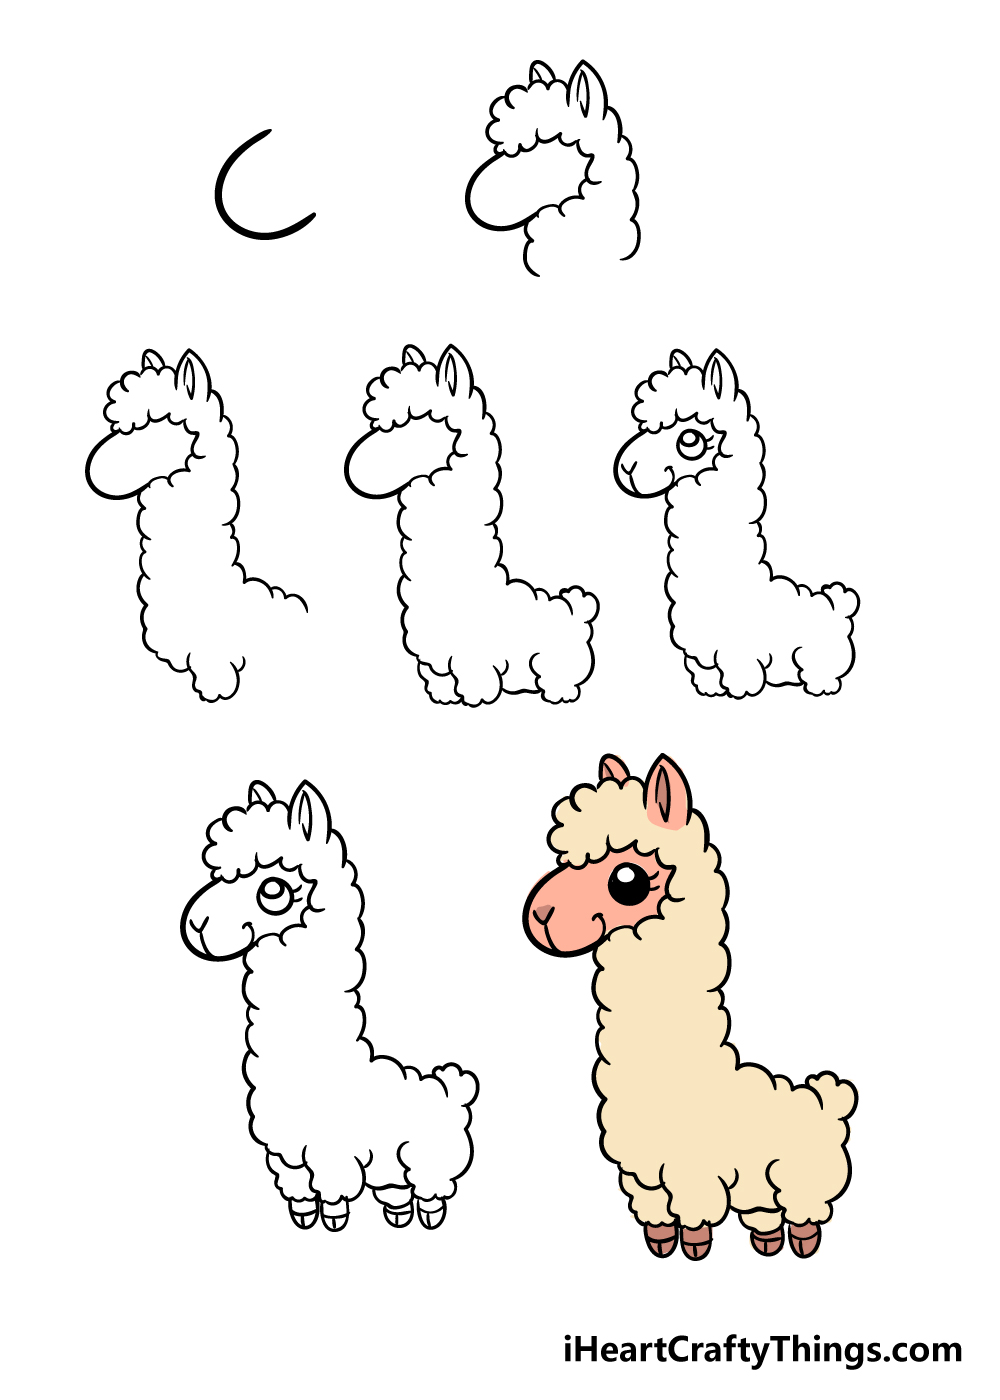 how to draw llama in 7 steps